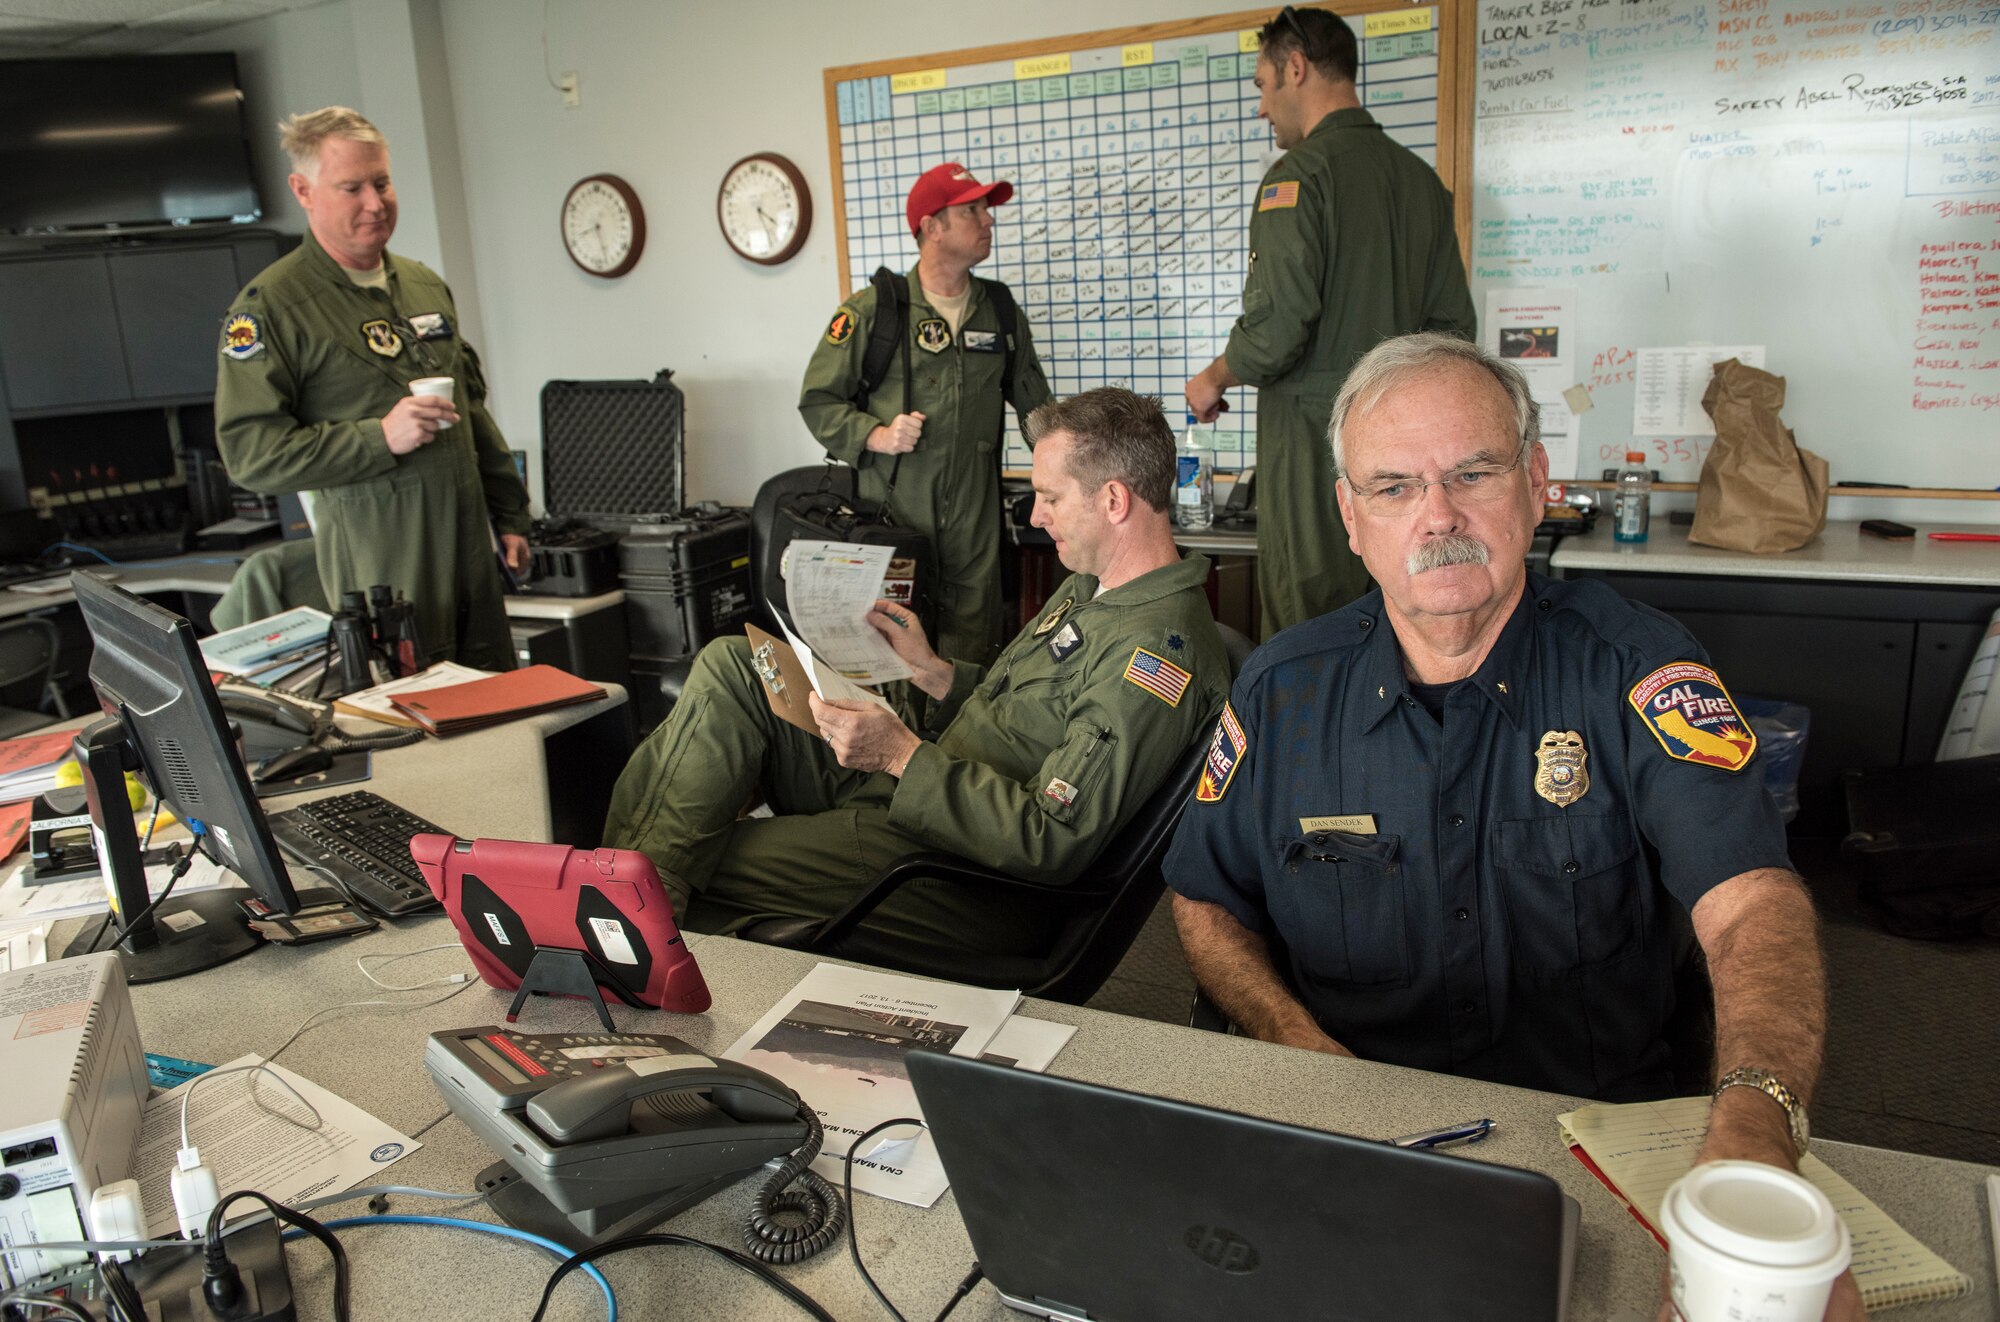 Cal Fire coordinators and the 146th Airlift Wing mission commander, left, work in concert to deploy C-130Js on fire suppression sorties at Channel Islands Air National Guard Base in Port Hueneme, California, Dec. 10, 2017. The aircraft carry the Modular Airborne Fire Fighting System to drop fire suppression chemicals across the path of the Thomas Fire burning in Ventura and Santa Barbara counties in order to slow and contain the massive wildfire. (U.S. Air Force photo by J.M. Eddins Jr.)